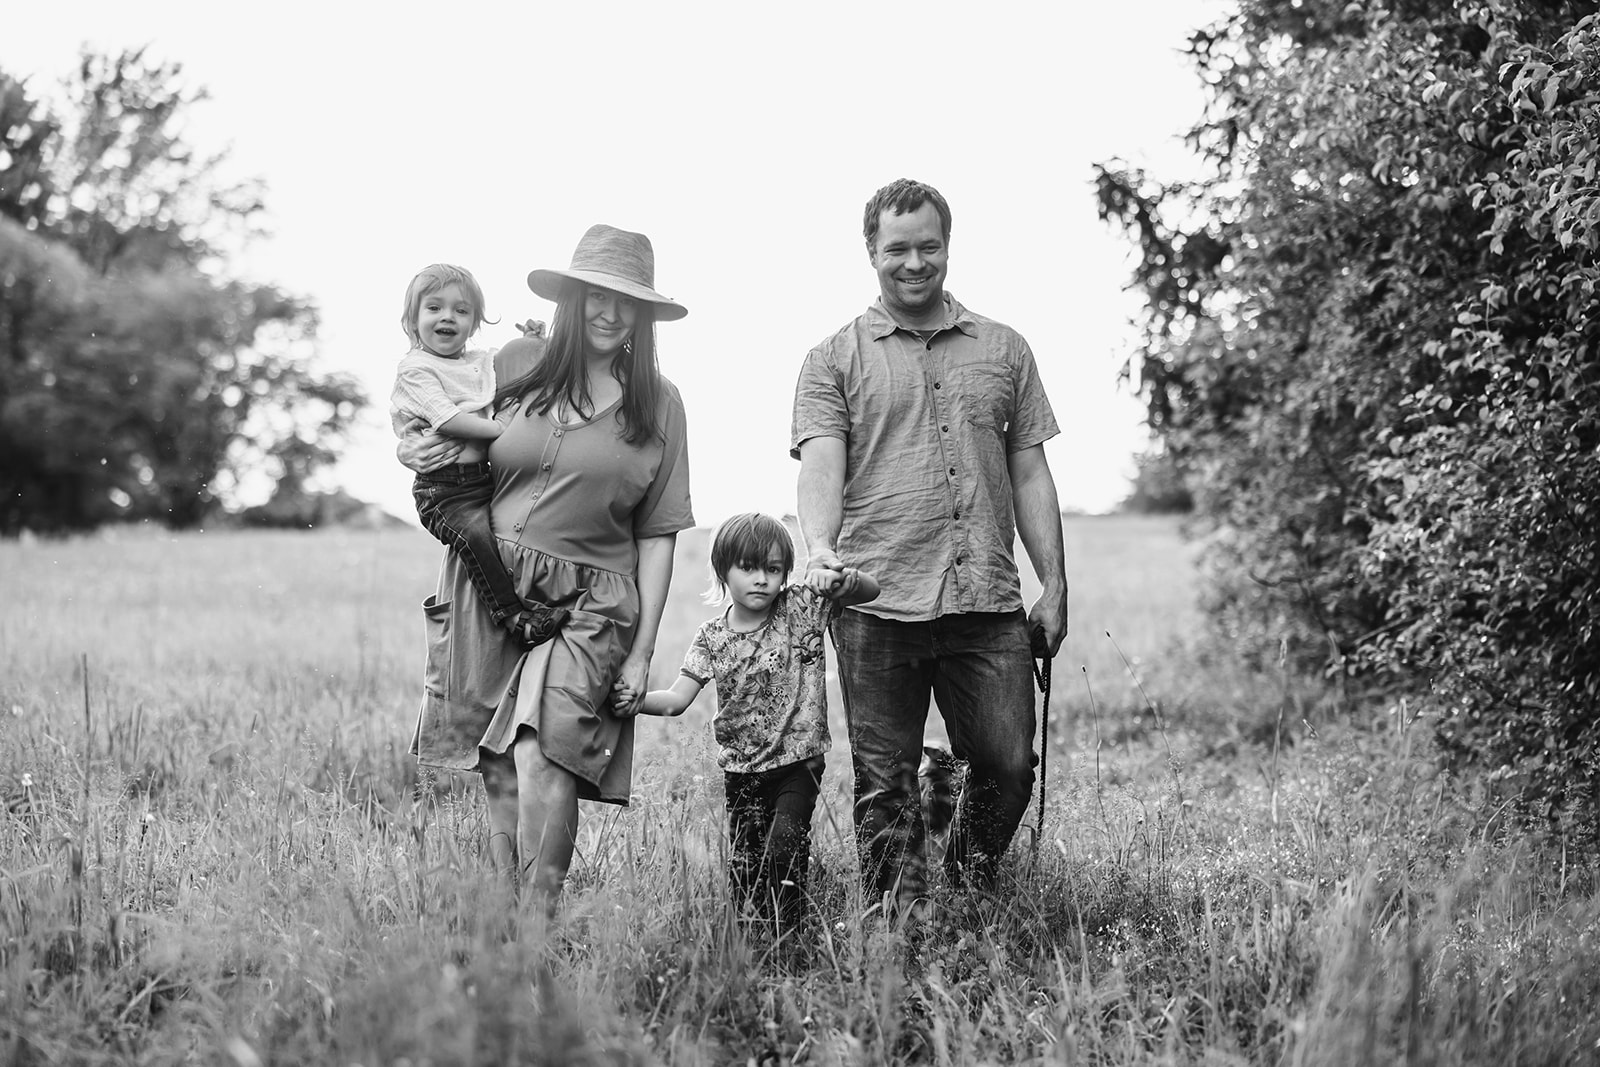 Family outdoor photoshoot in the picturesque fields